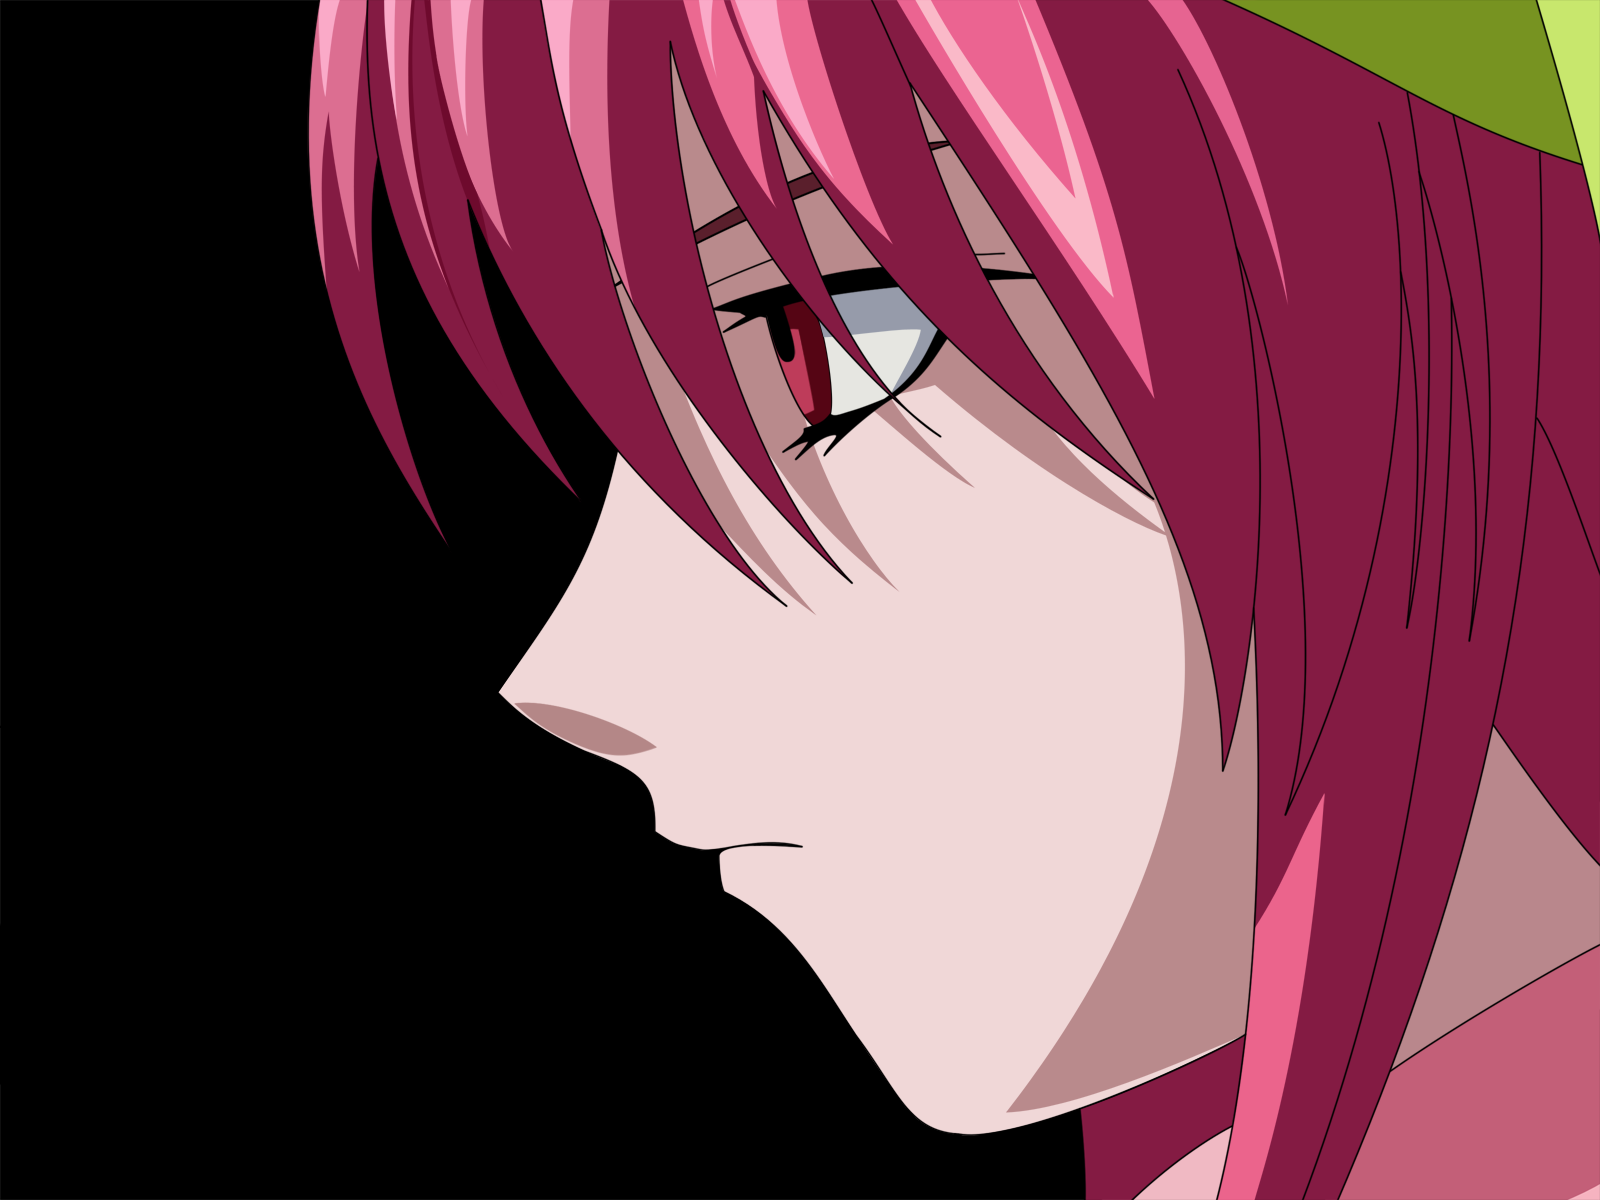 Anime character Lucy (Elfen Lied) from a desktop wallpaper.